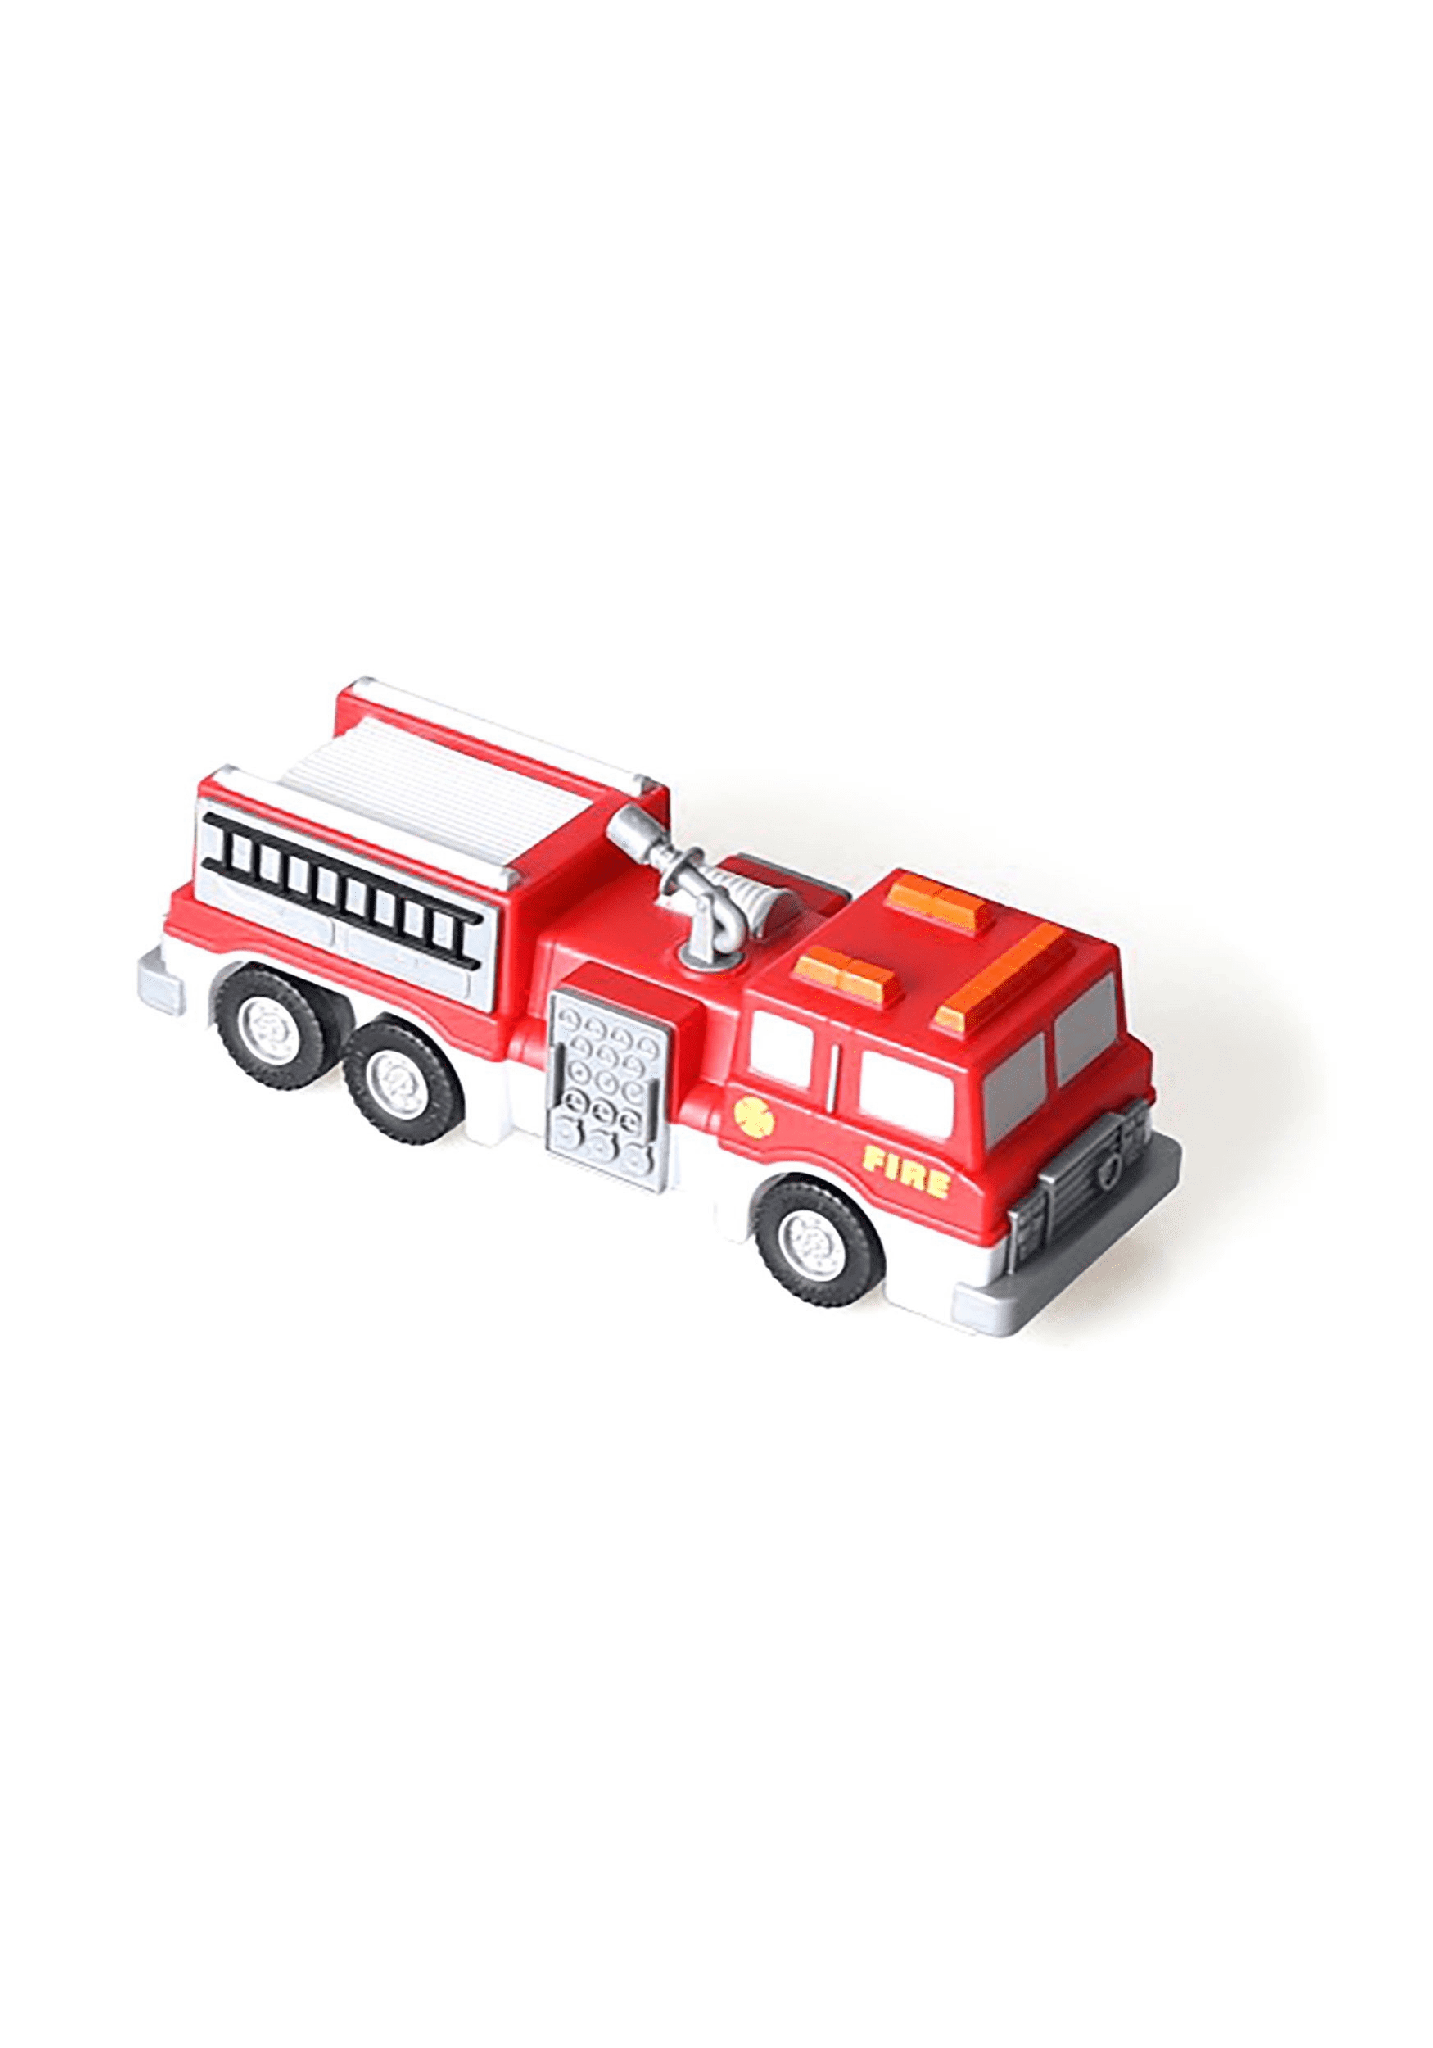 Popular Playthings Magnetic Mix or Match Fire & Rescue Vehicles